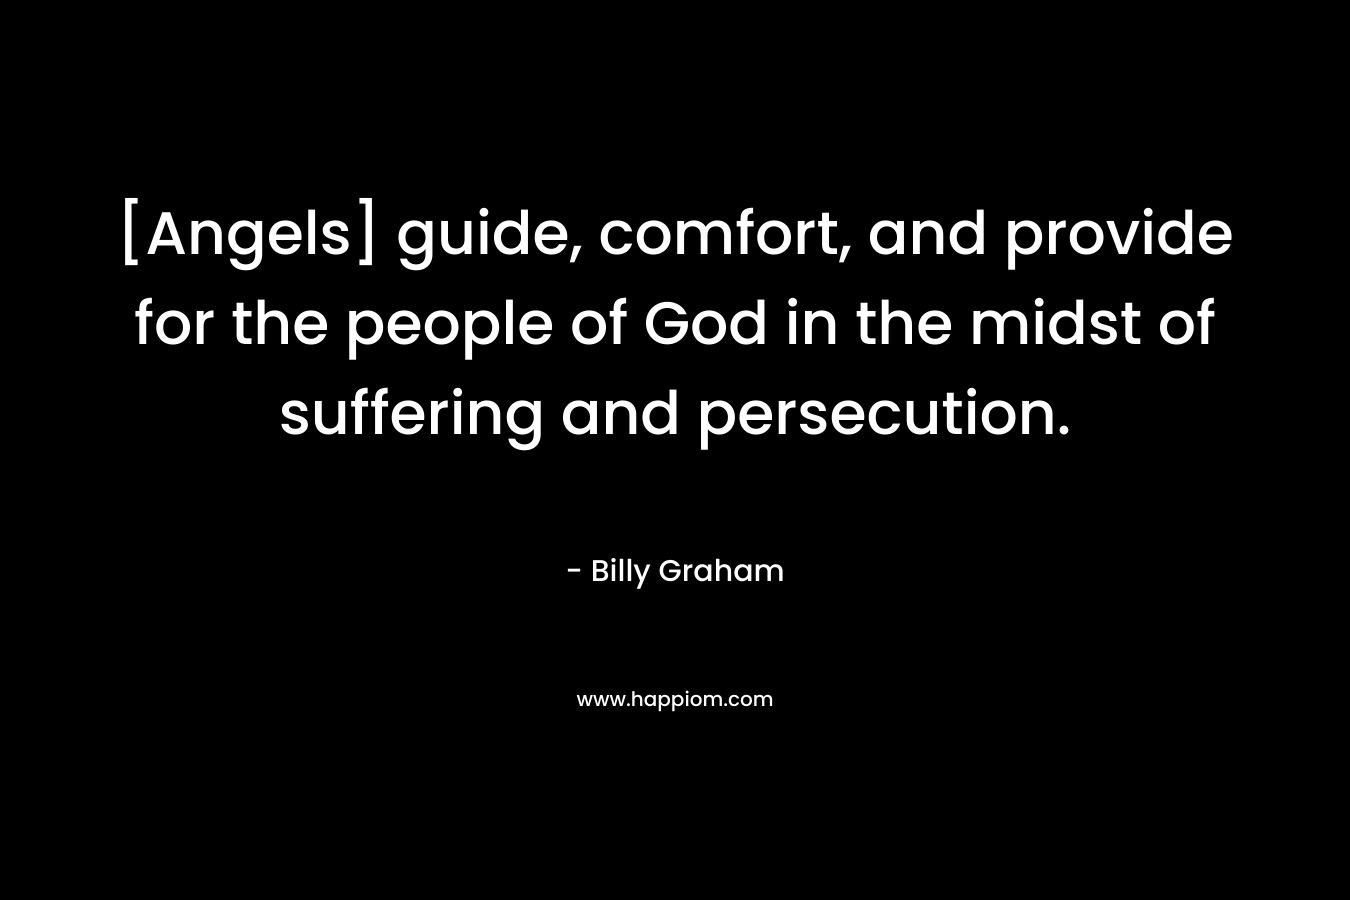 [Angels] guide, comfort, and provide for the people of God in the midst of suffering and persecution.